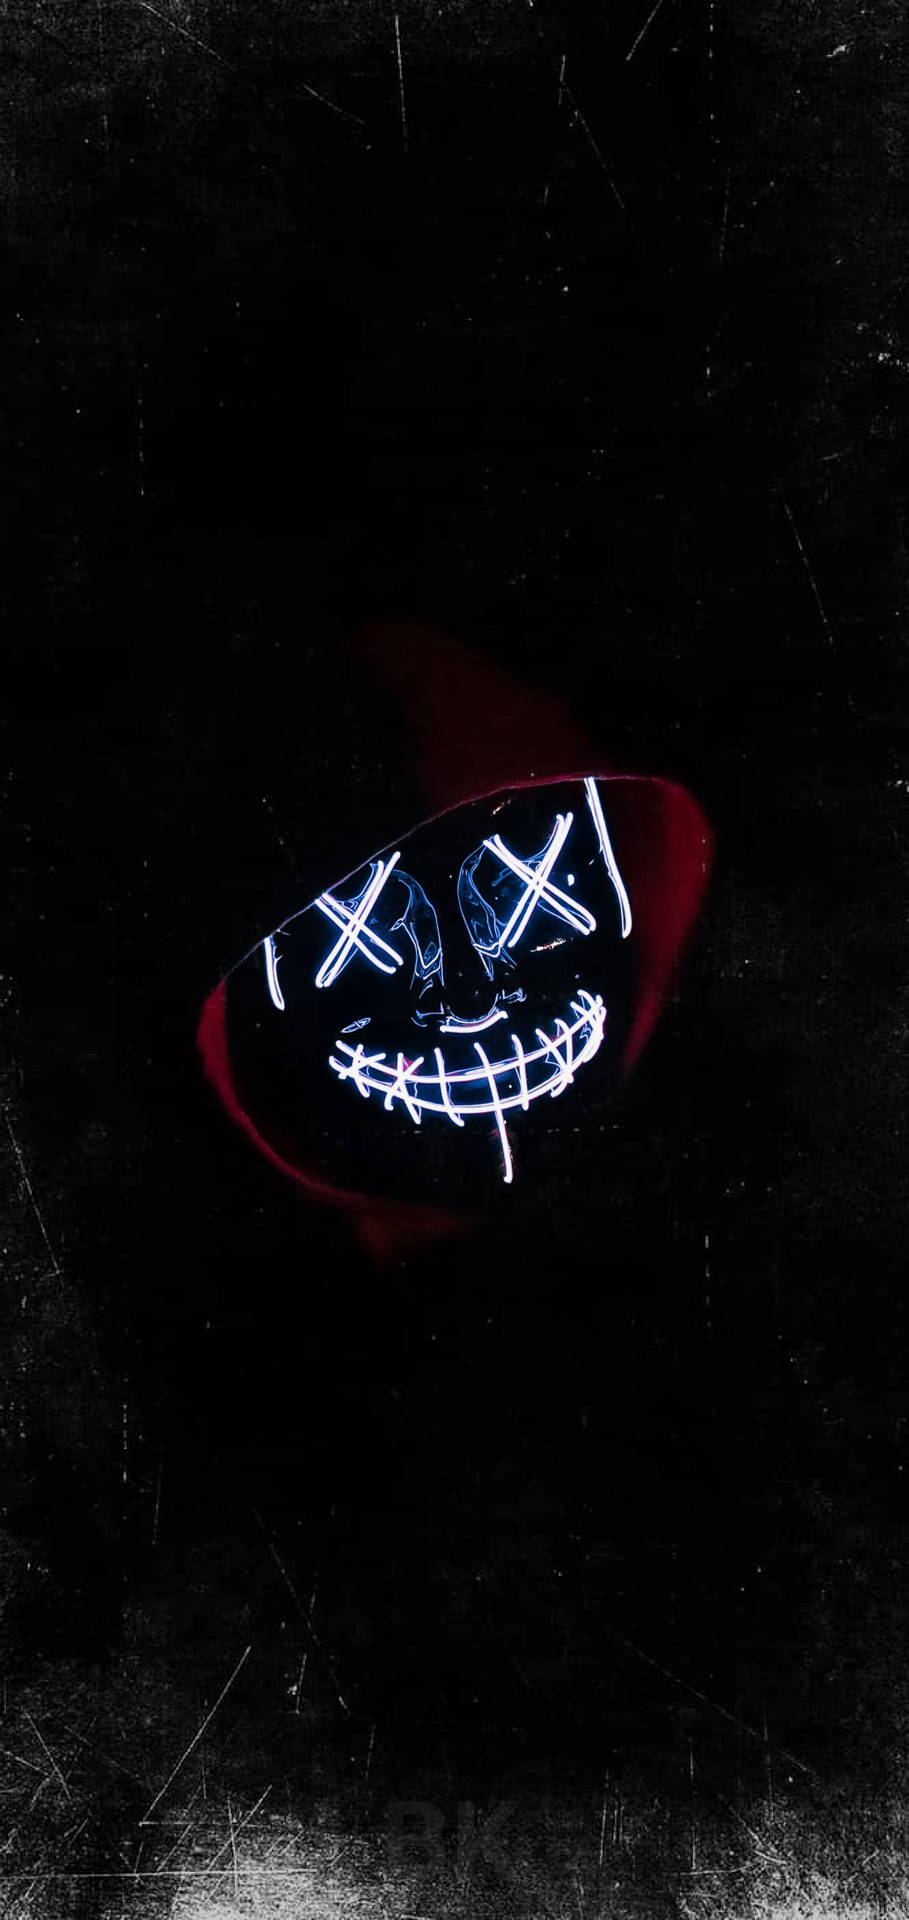 Ominous Purge Mask in Red Hood - Fear and Excitement Intertwined Wallpaper